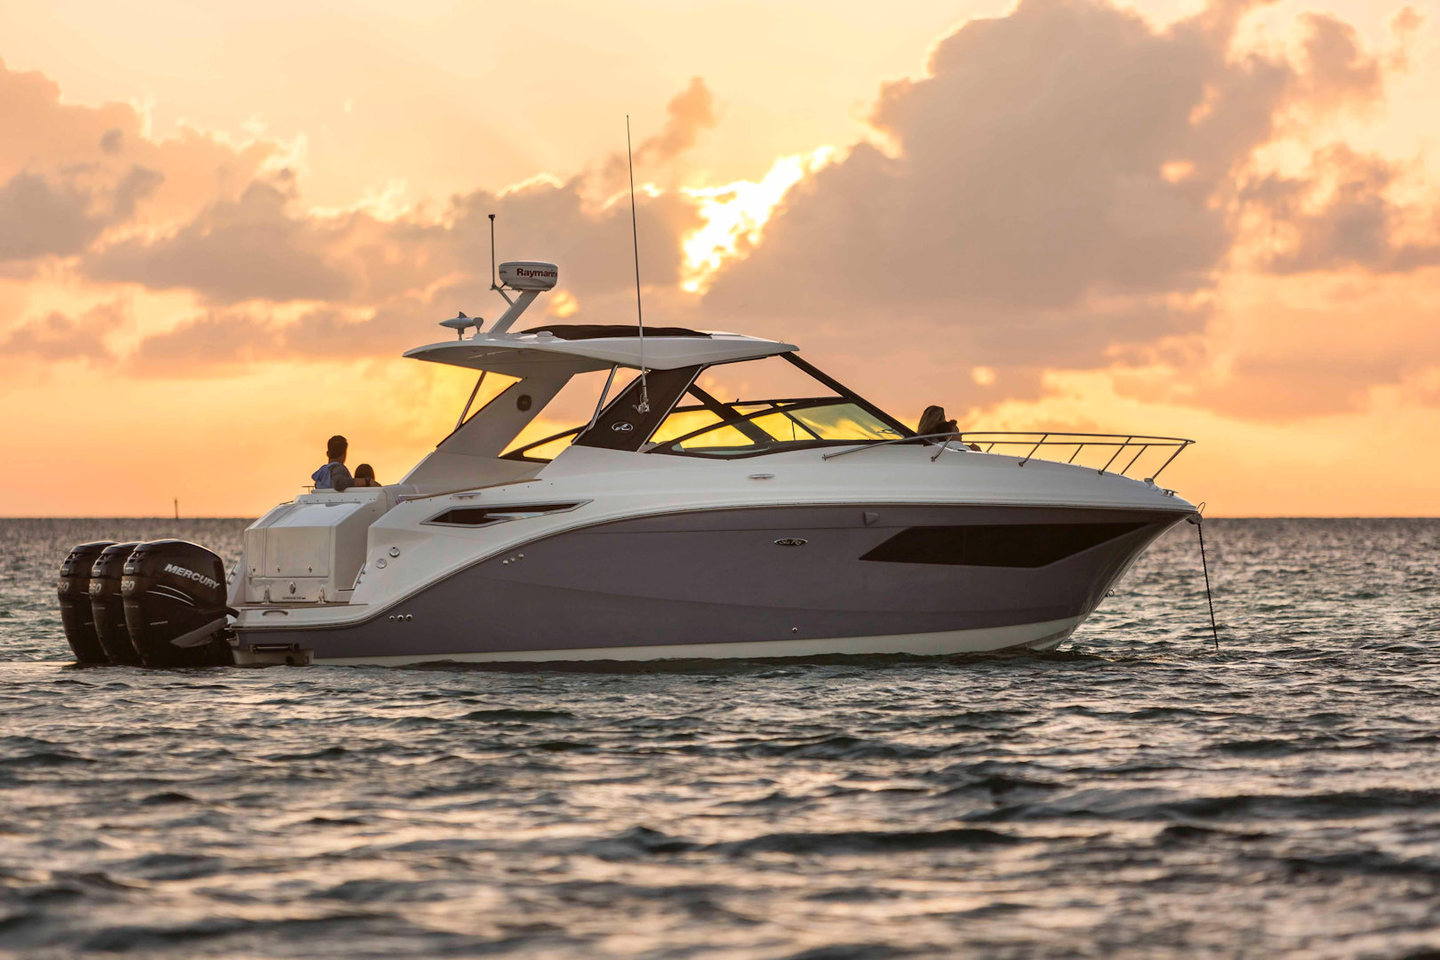 360 VR Virtual Tours of the Sea Ray Sundancer 320 Outboard